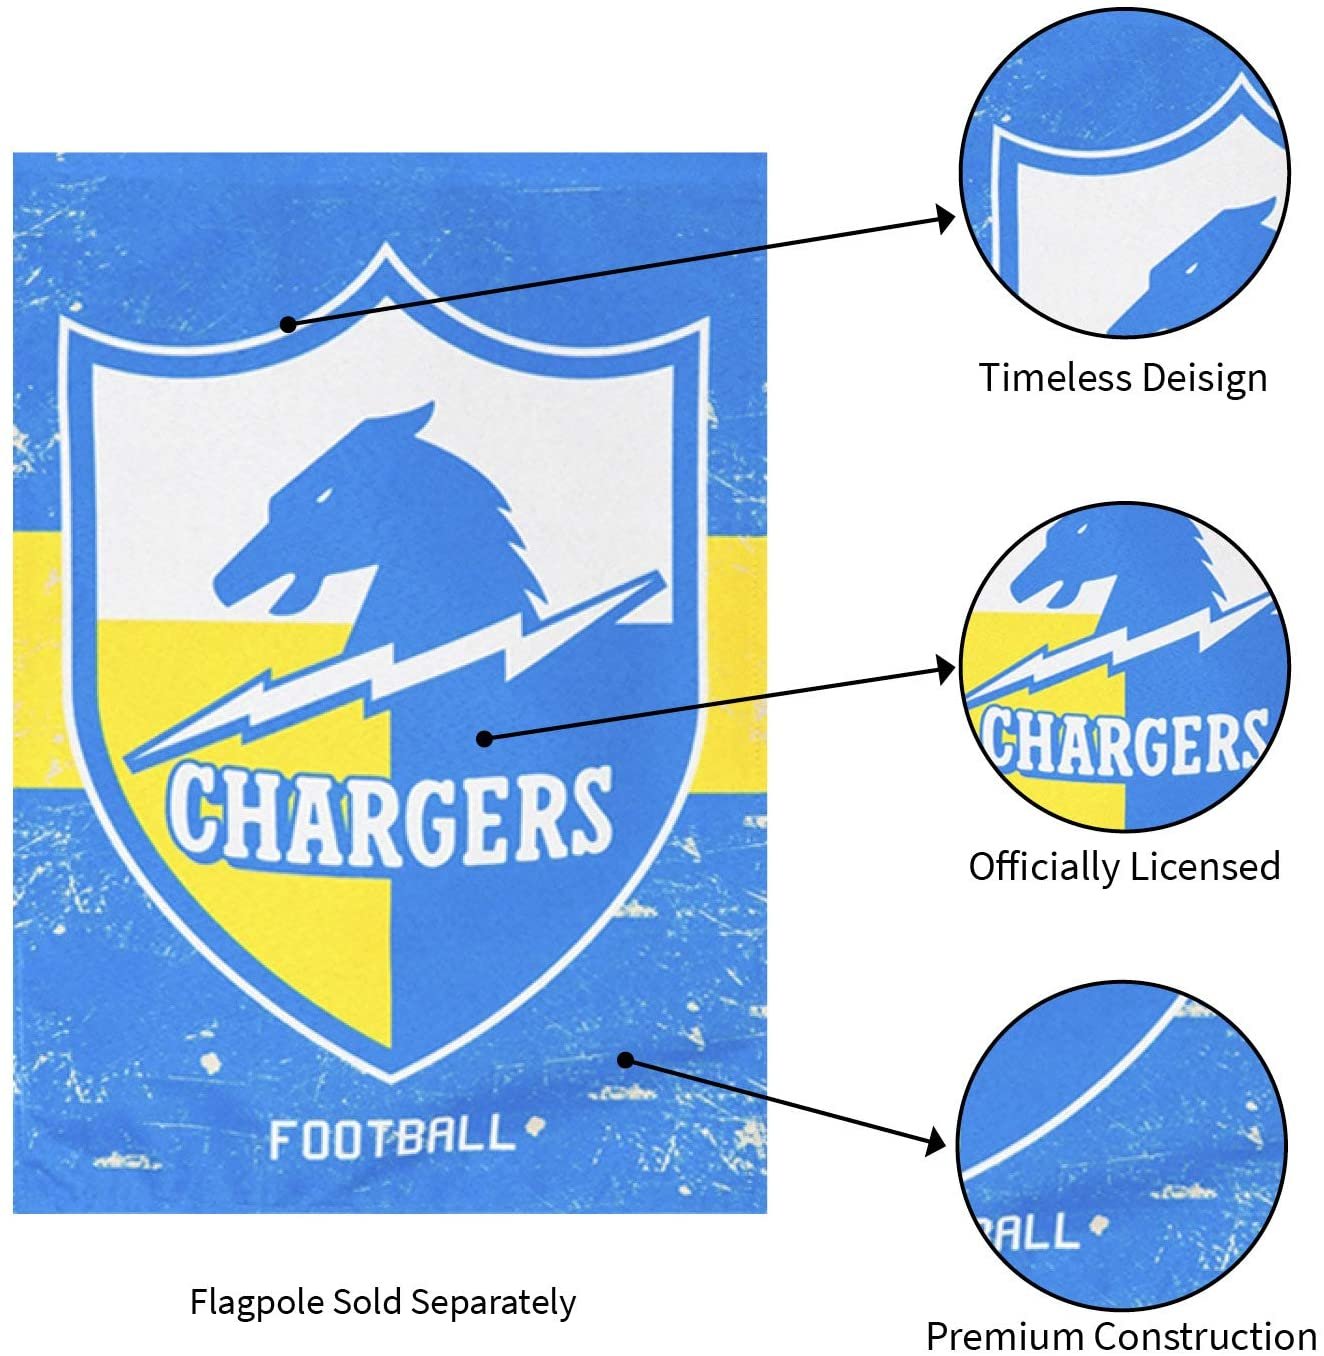 Los Angeles Chargers Garden Flag Banner, Double Sided, Linen, Retro Vintage Design, 12.5x18 Inch